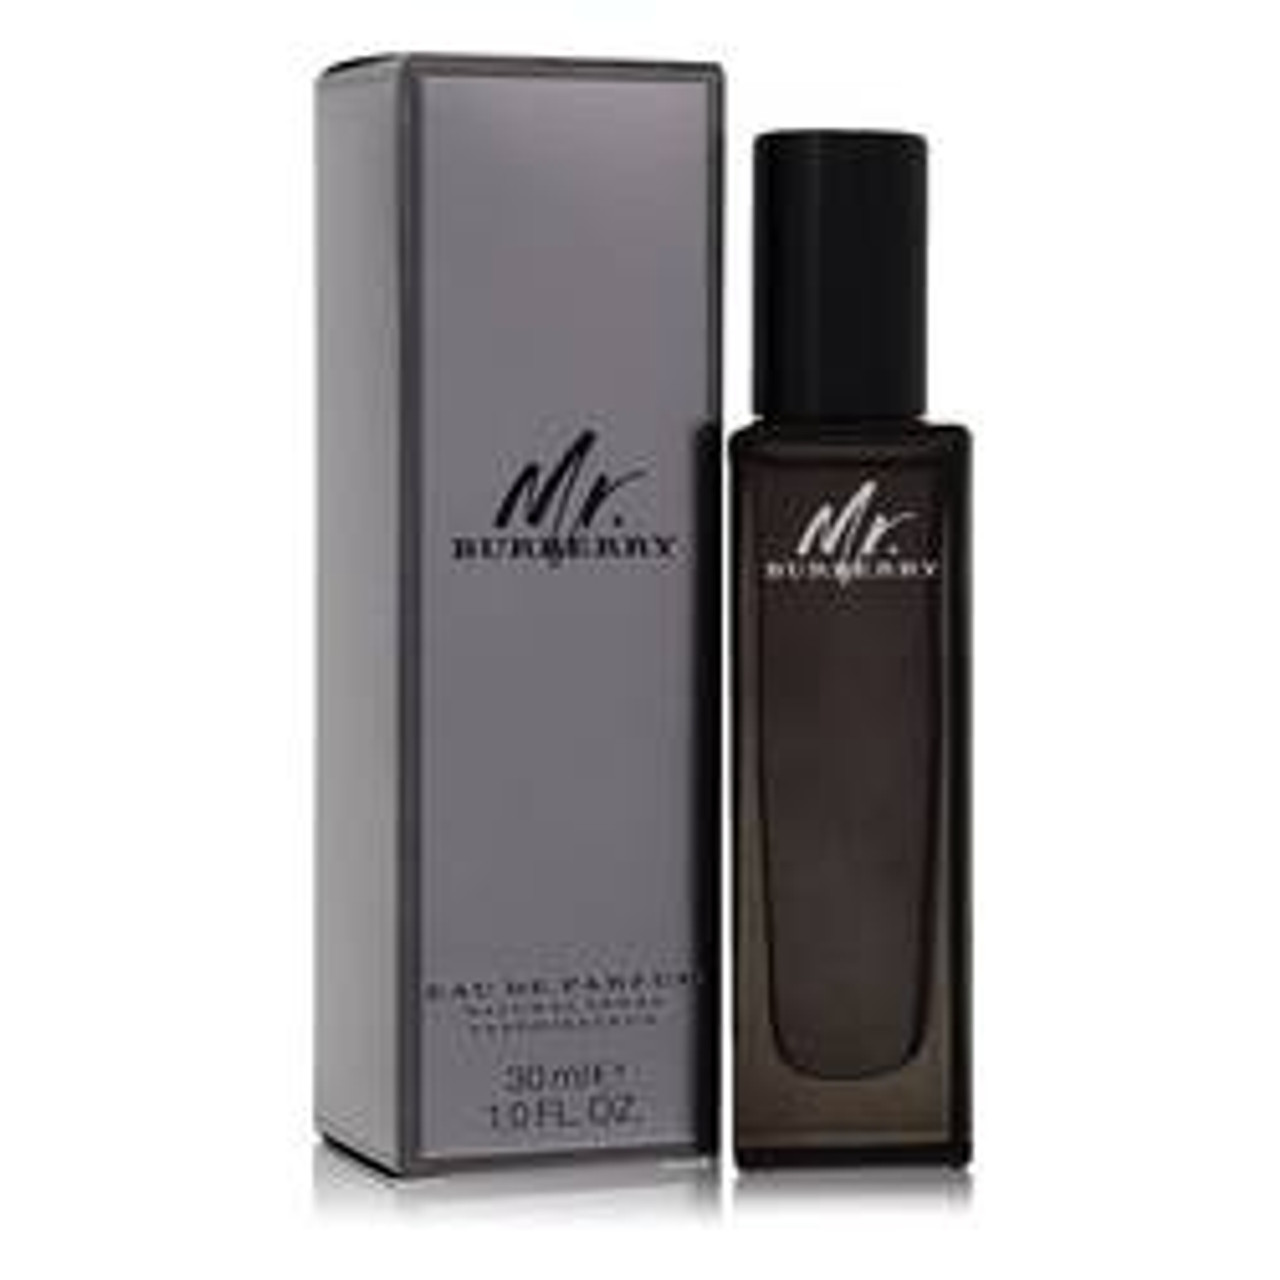 Mr Burberry Cologne By Burberry Eau De Parfum Spray 1 oz for Men - [From 112.00 - Choose pk Qty ] - *Ships from Miami